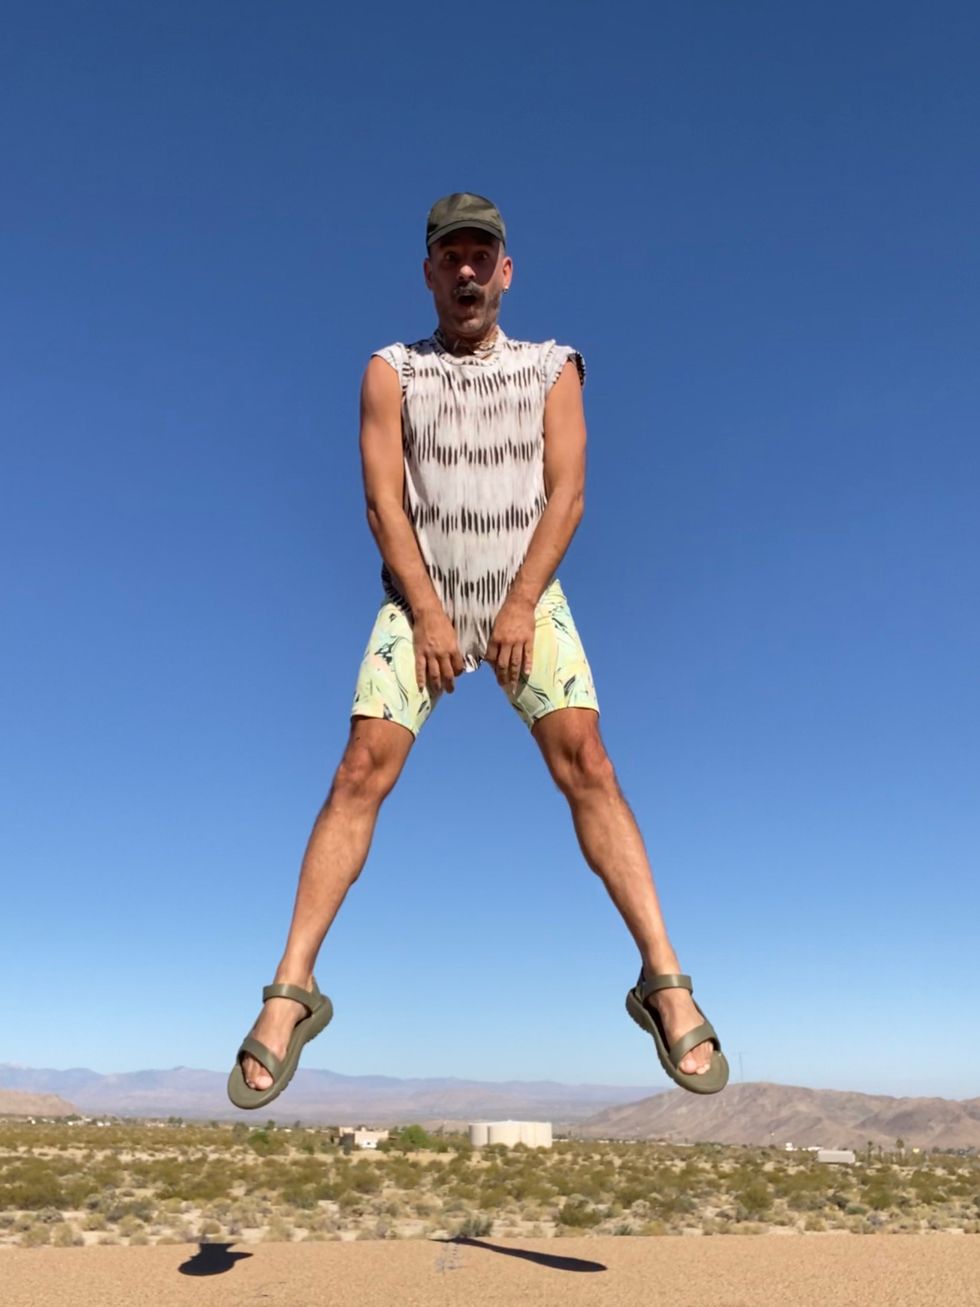 Heffington jumps into the air in his backyard in the desert, making an animated surprised face. He wears sandals, yellow shorts and a black and grey patterned shirt, and a black cap.